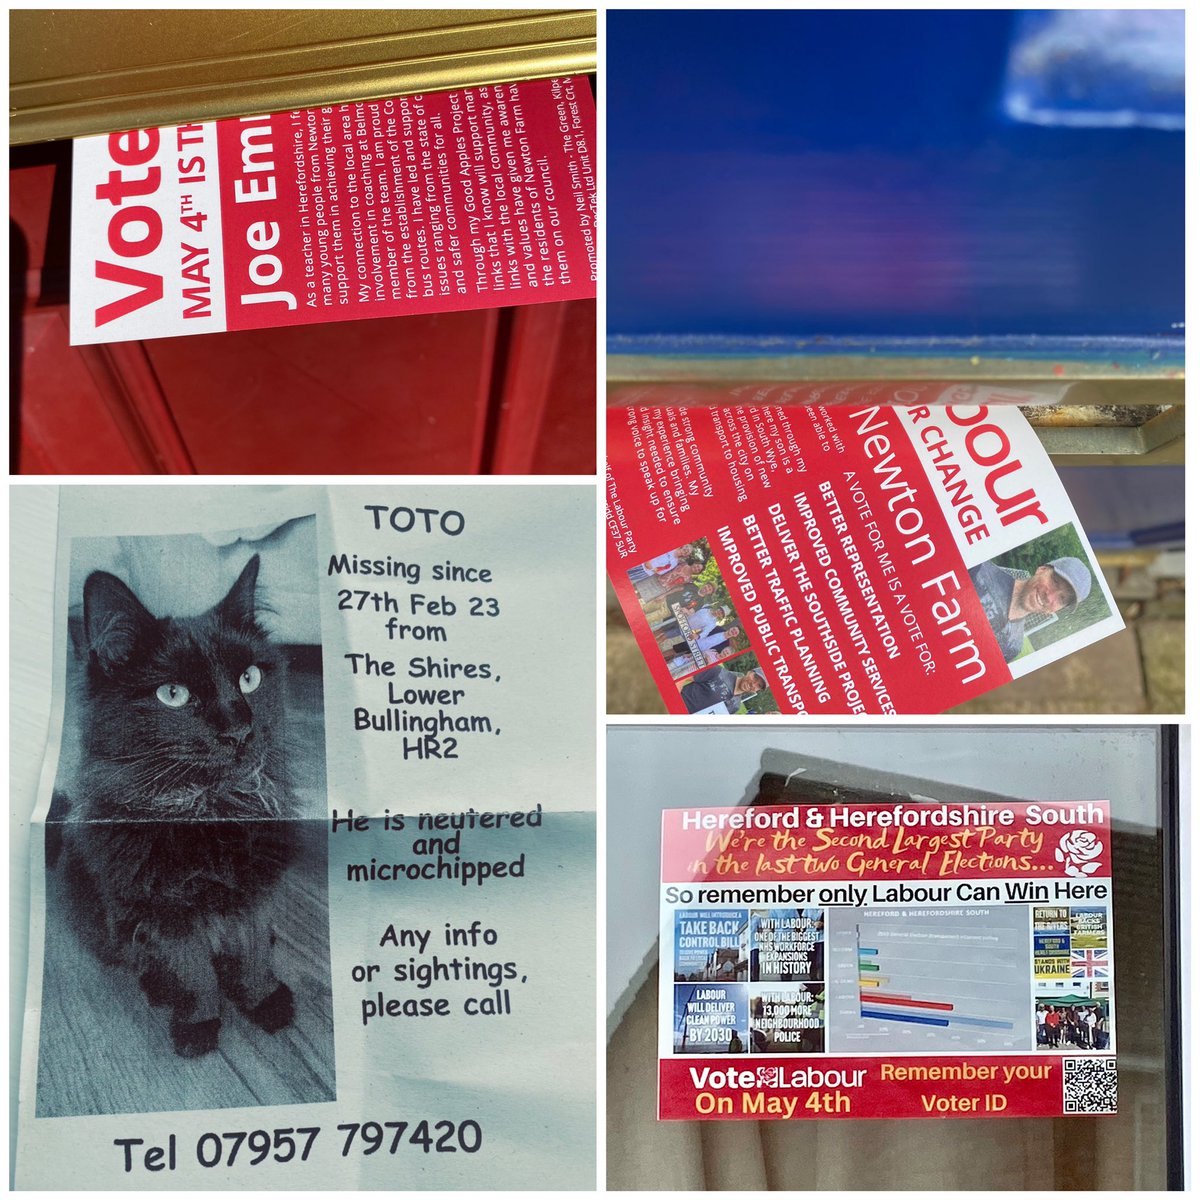 Out in Newton Farm yesterday talking & turning those blue doors red 😉 - great to see #Labour in the windows as well, though I hope the couple find their lost cat 🐈‍⬛- please help #Herefordshire #lostcats #Hereford #LabourDoorstep @labtowin @herefordlabour @rurallabouruk @WMLabour